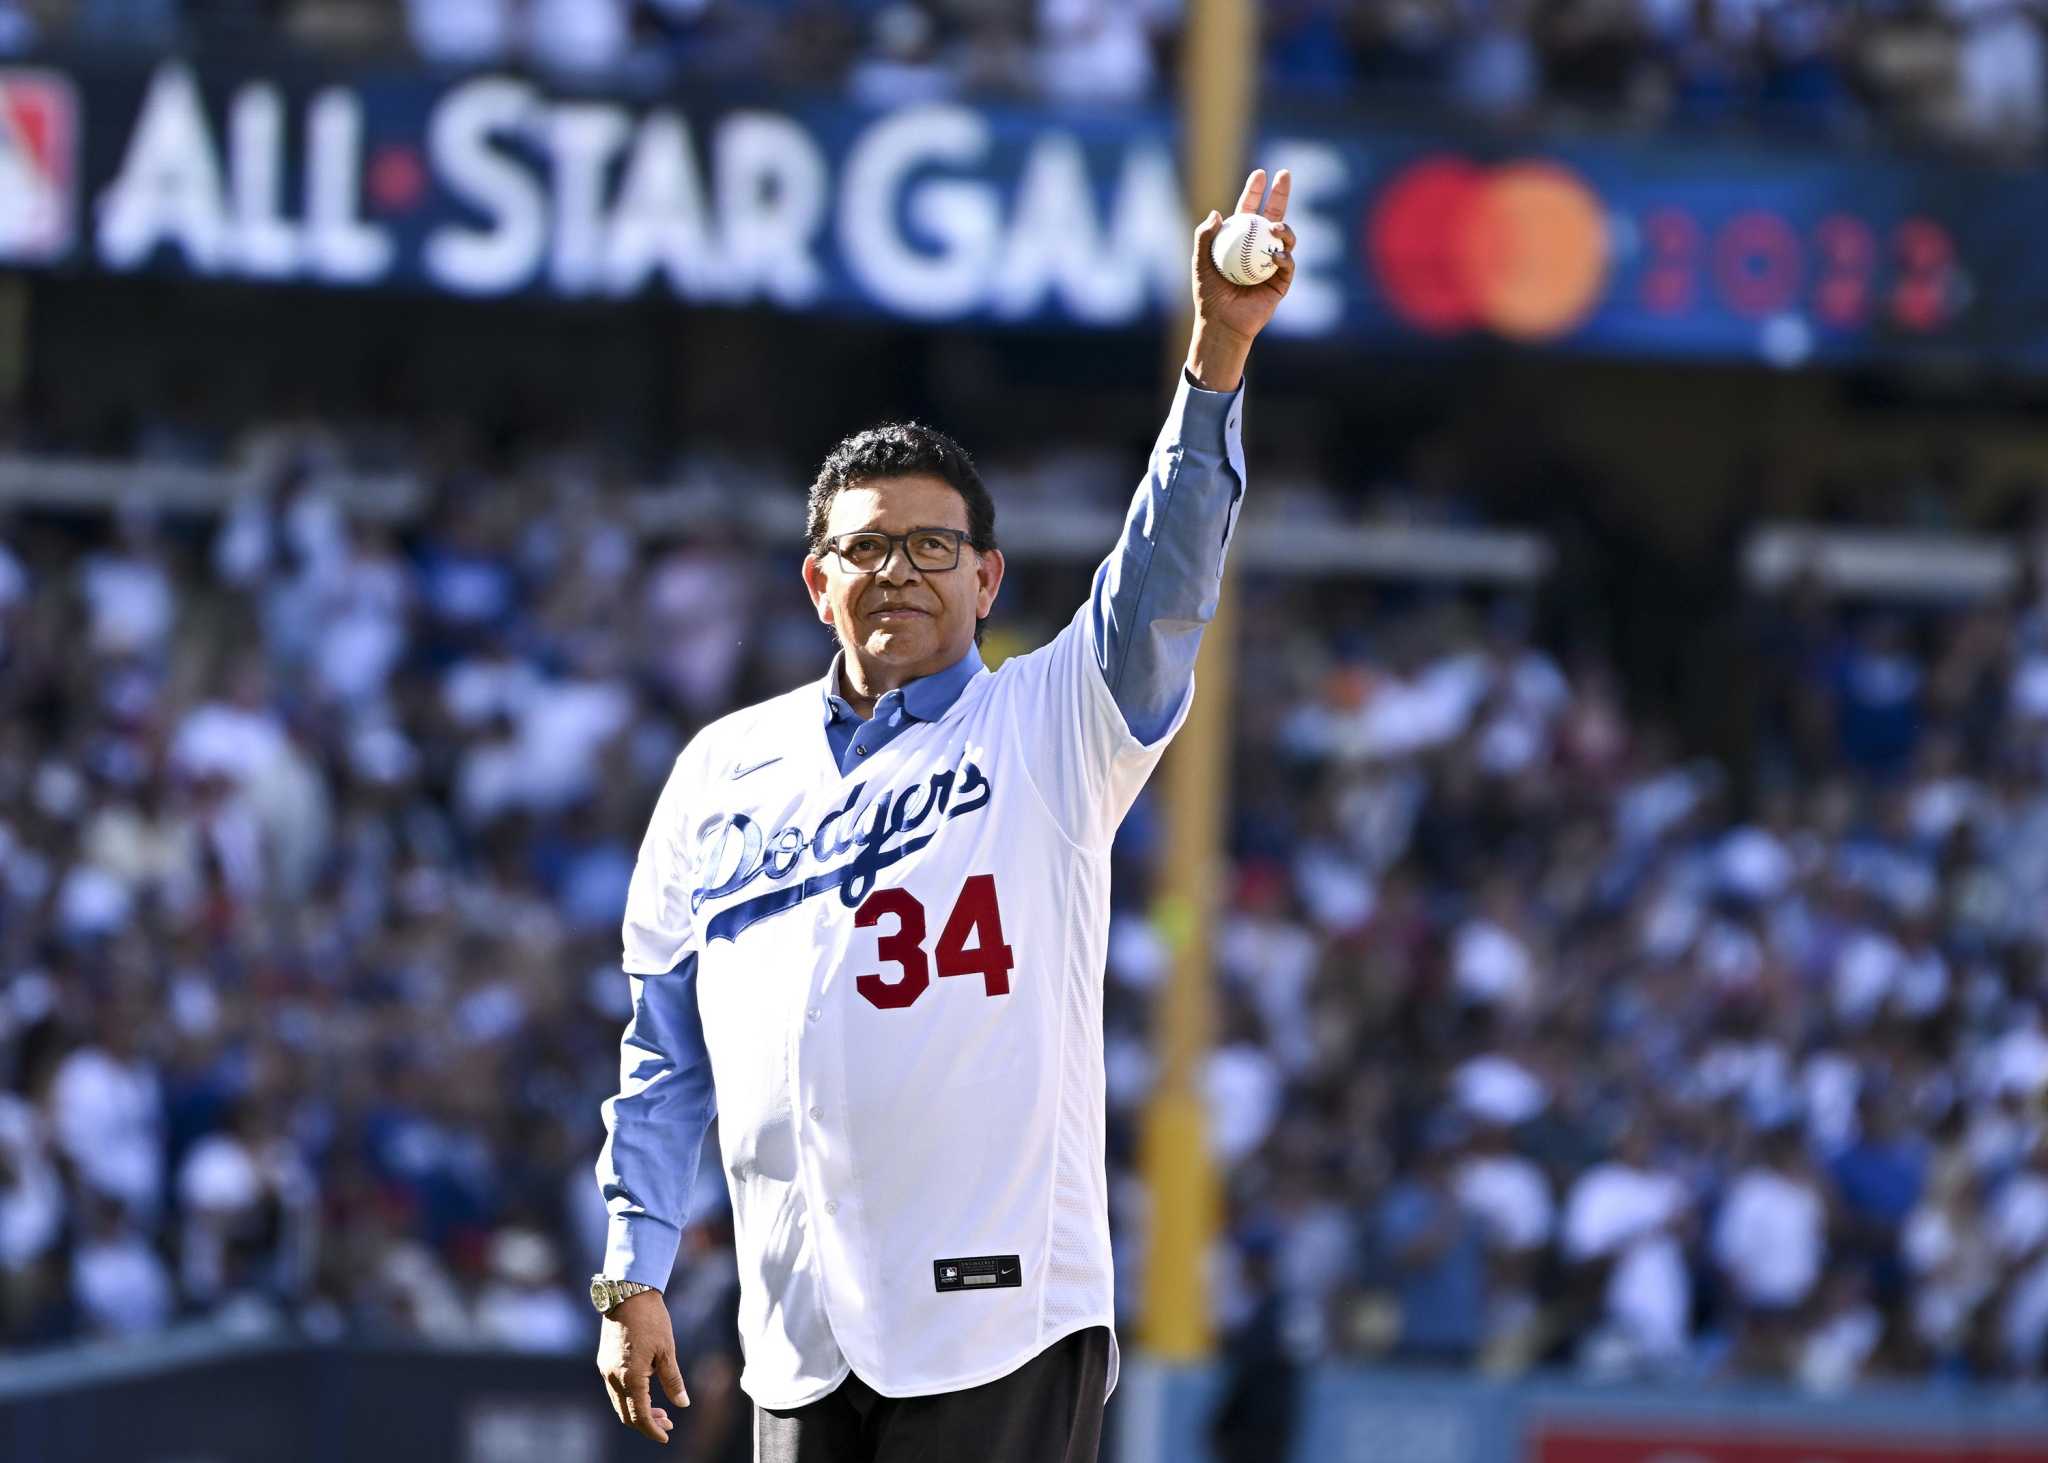 Will the Dodgers retire uniform number 31?